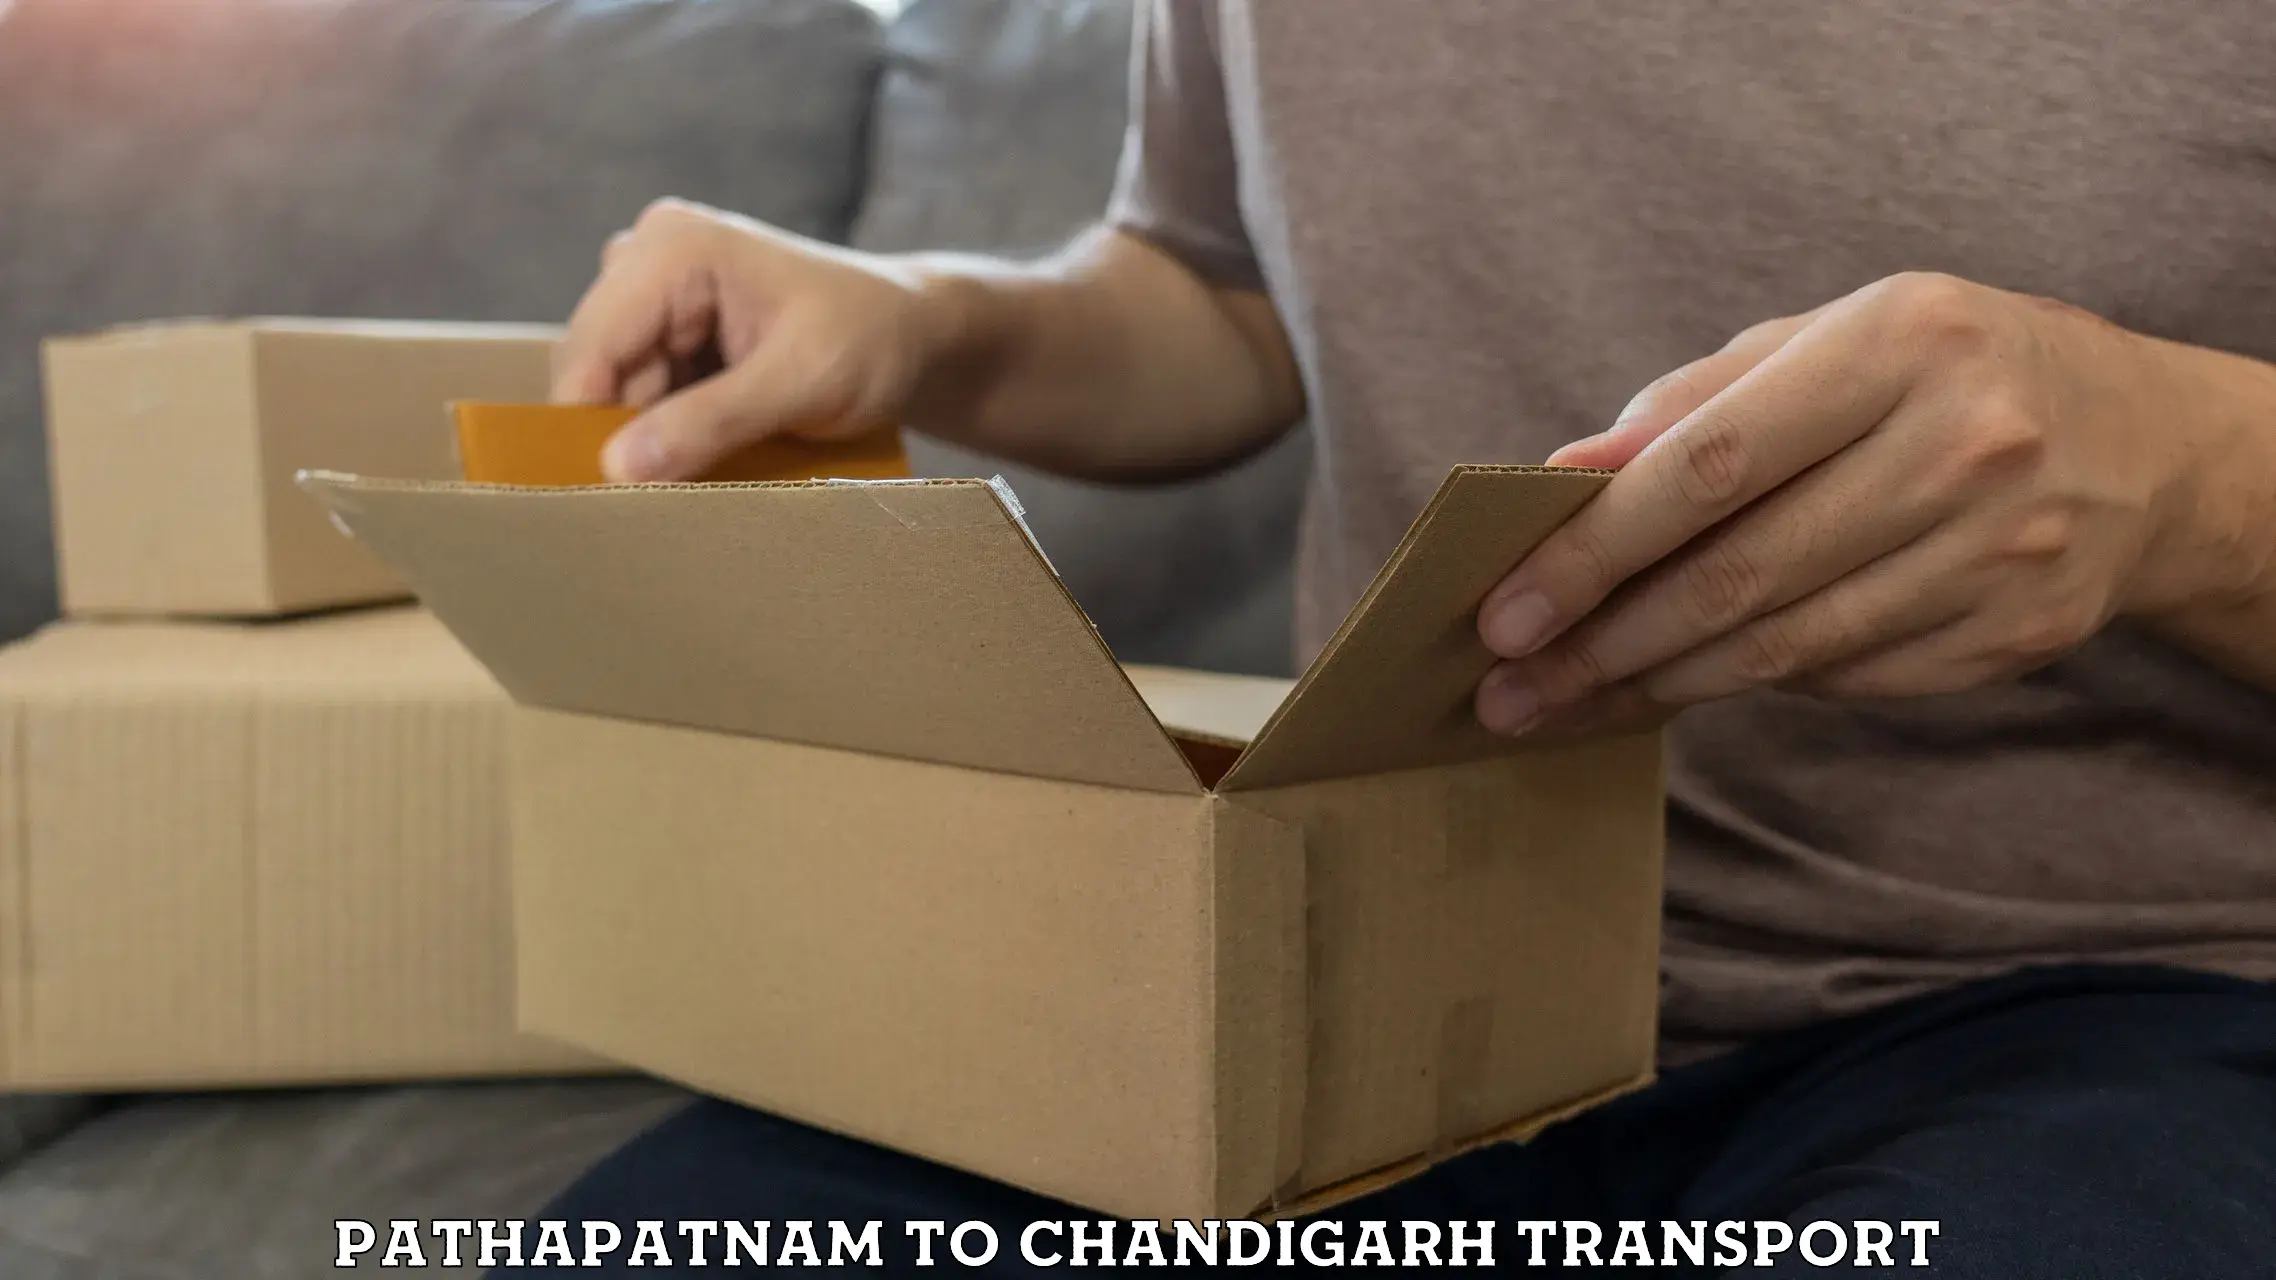 Cargo train transport services in Pathapatnam to Chandigarh